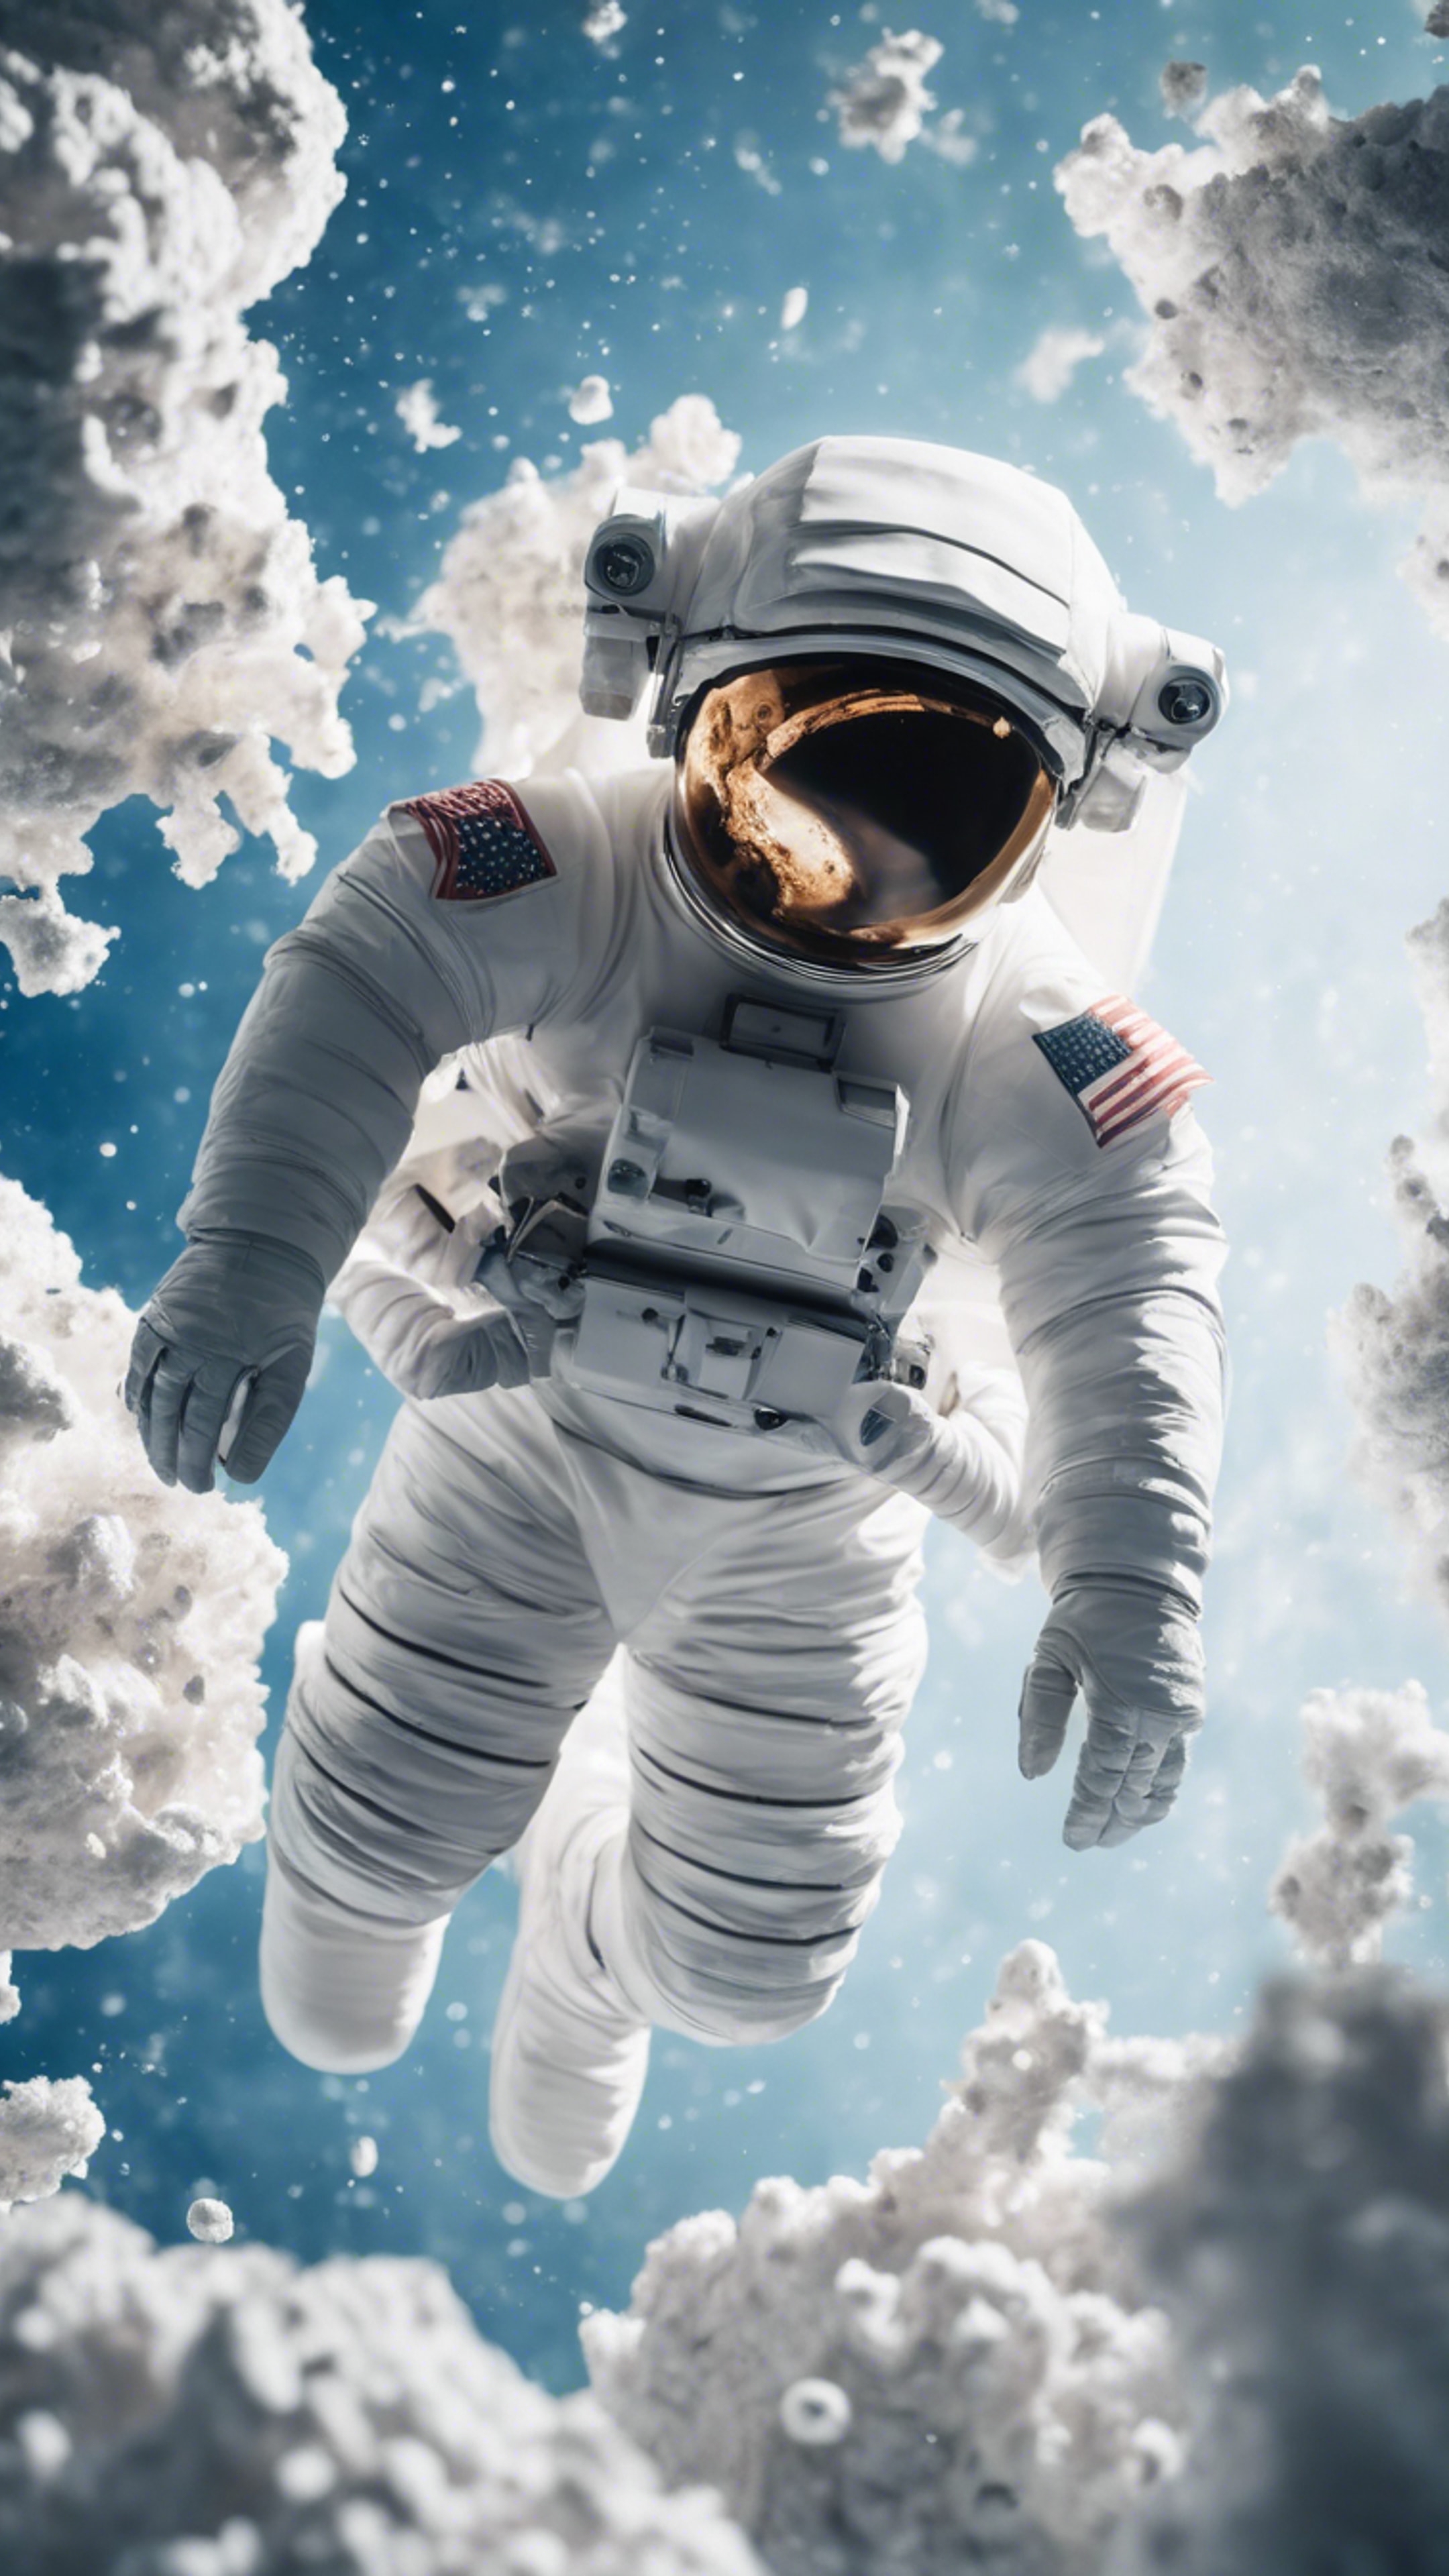 Astronaut in blue space suit floating in white zero-gravity space. کاغذ دیواری[9e9adc18daa440b493ac]